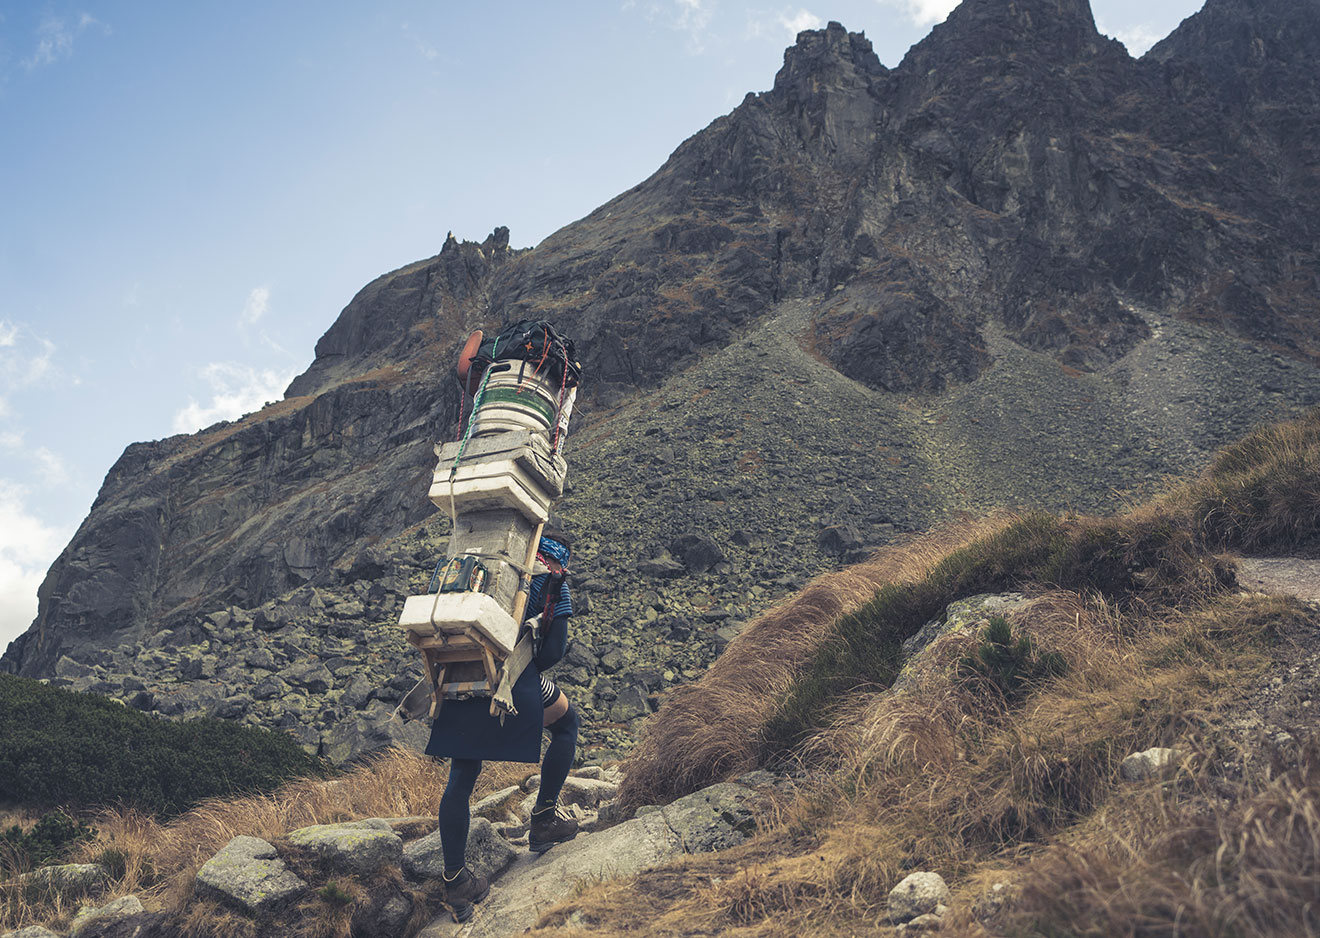 A Tatra Sherpa carrying his frame pack before a rocky ridgeline